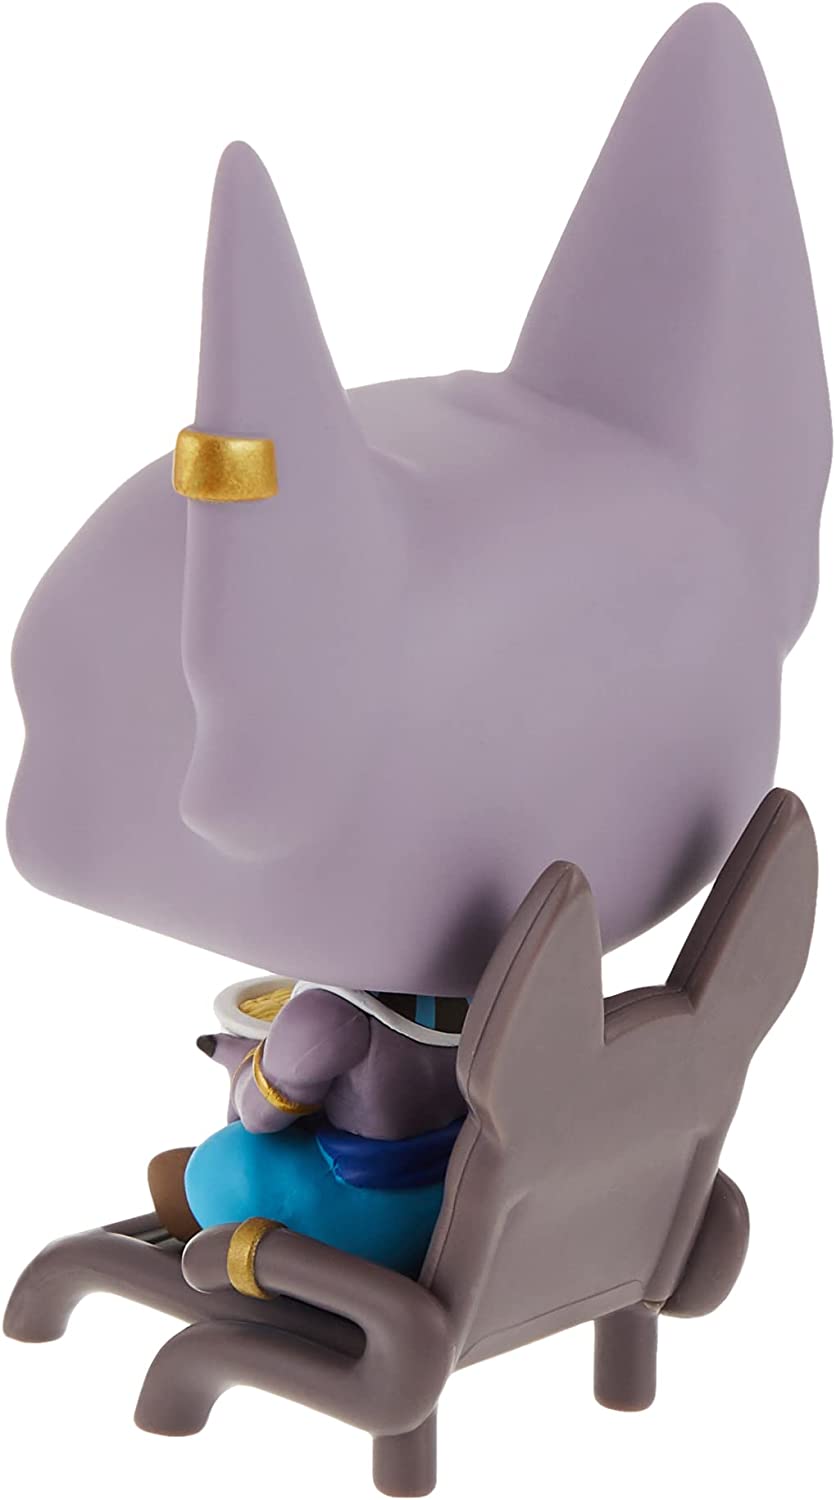 Funko POP 1110 Animation: Dragon Ball Super Beerus (Eating Noodles) Figure Hot Topic Exclusive